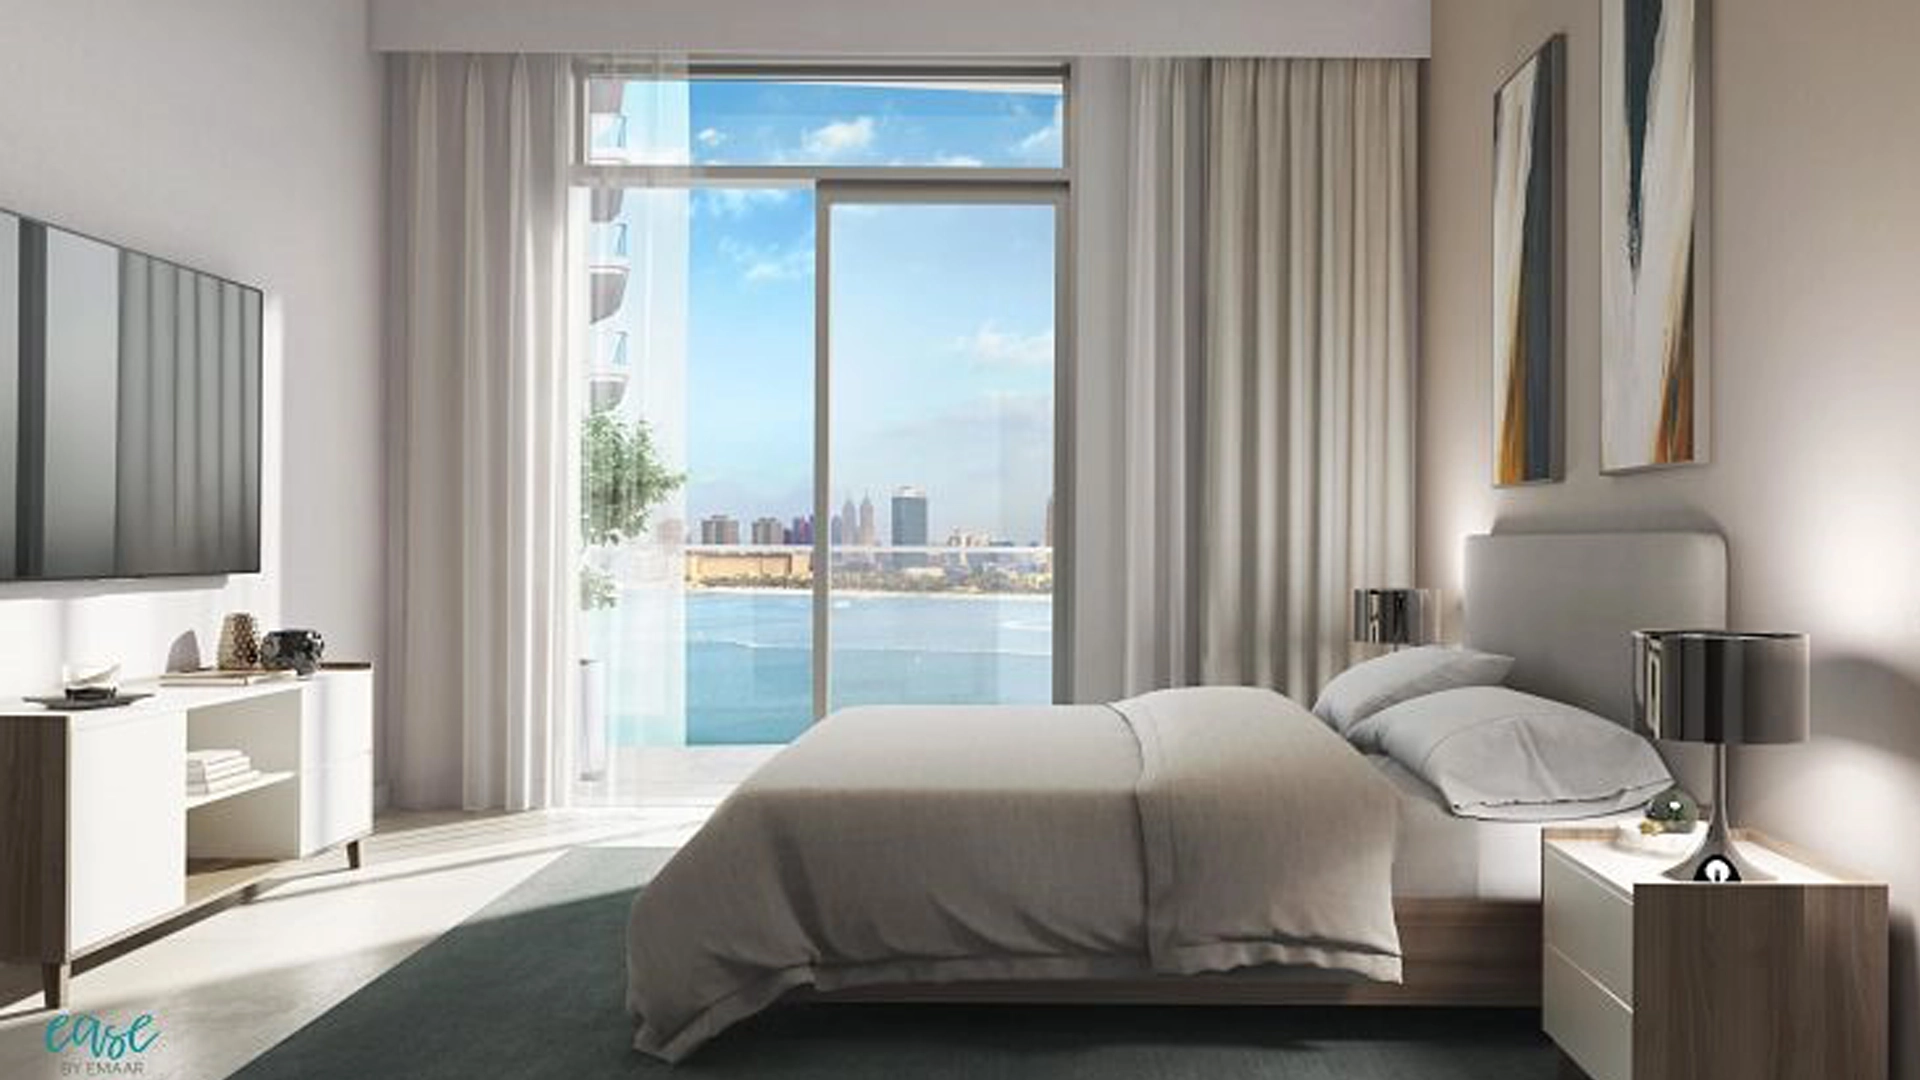 Edge-Realty-2-bedroom apartment for sale in Palace Beach Residence Dubai Harbour